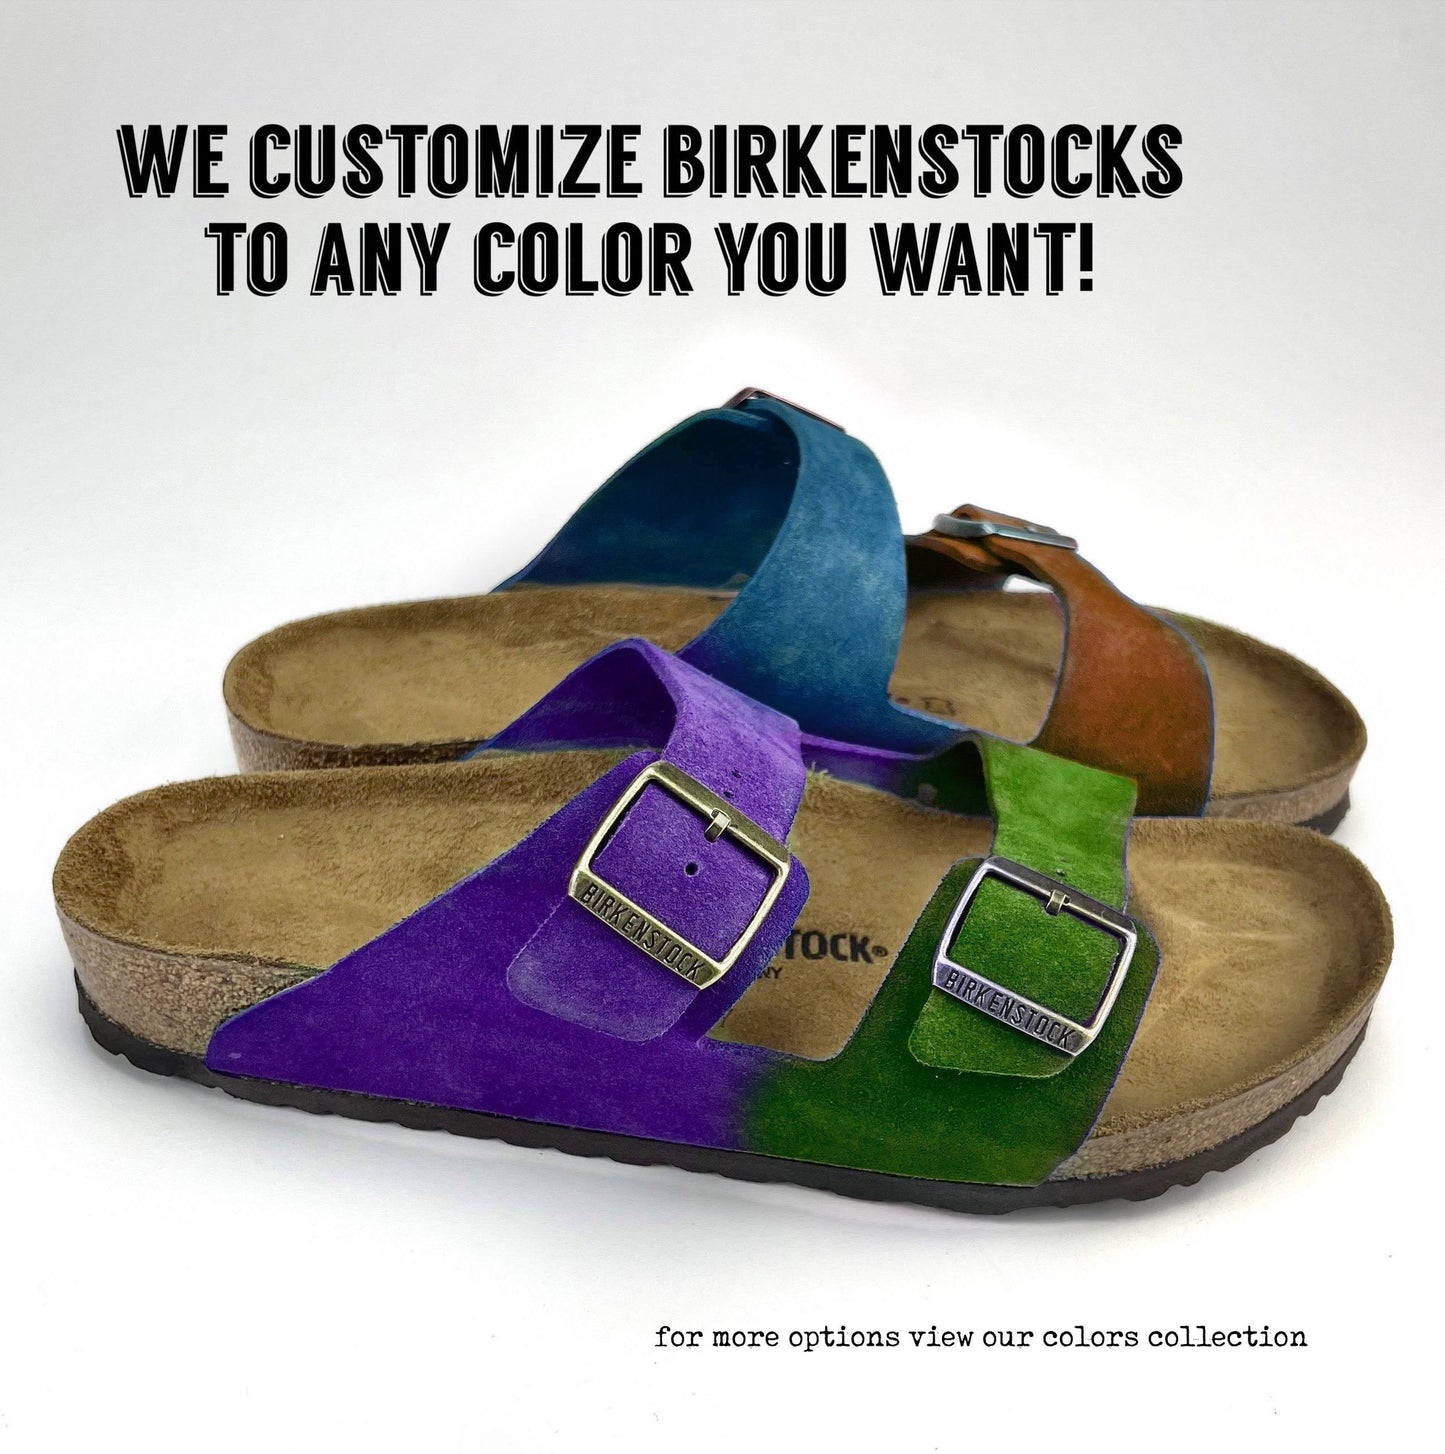 tie dye purple & green Birkenstock sandals with words that read "we customize birkenstocks in any color you want" by Butter Makes Me Happy